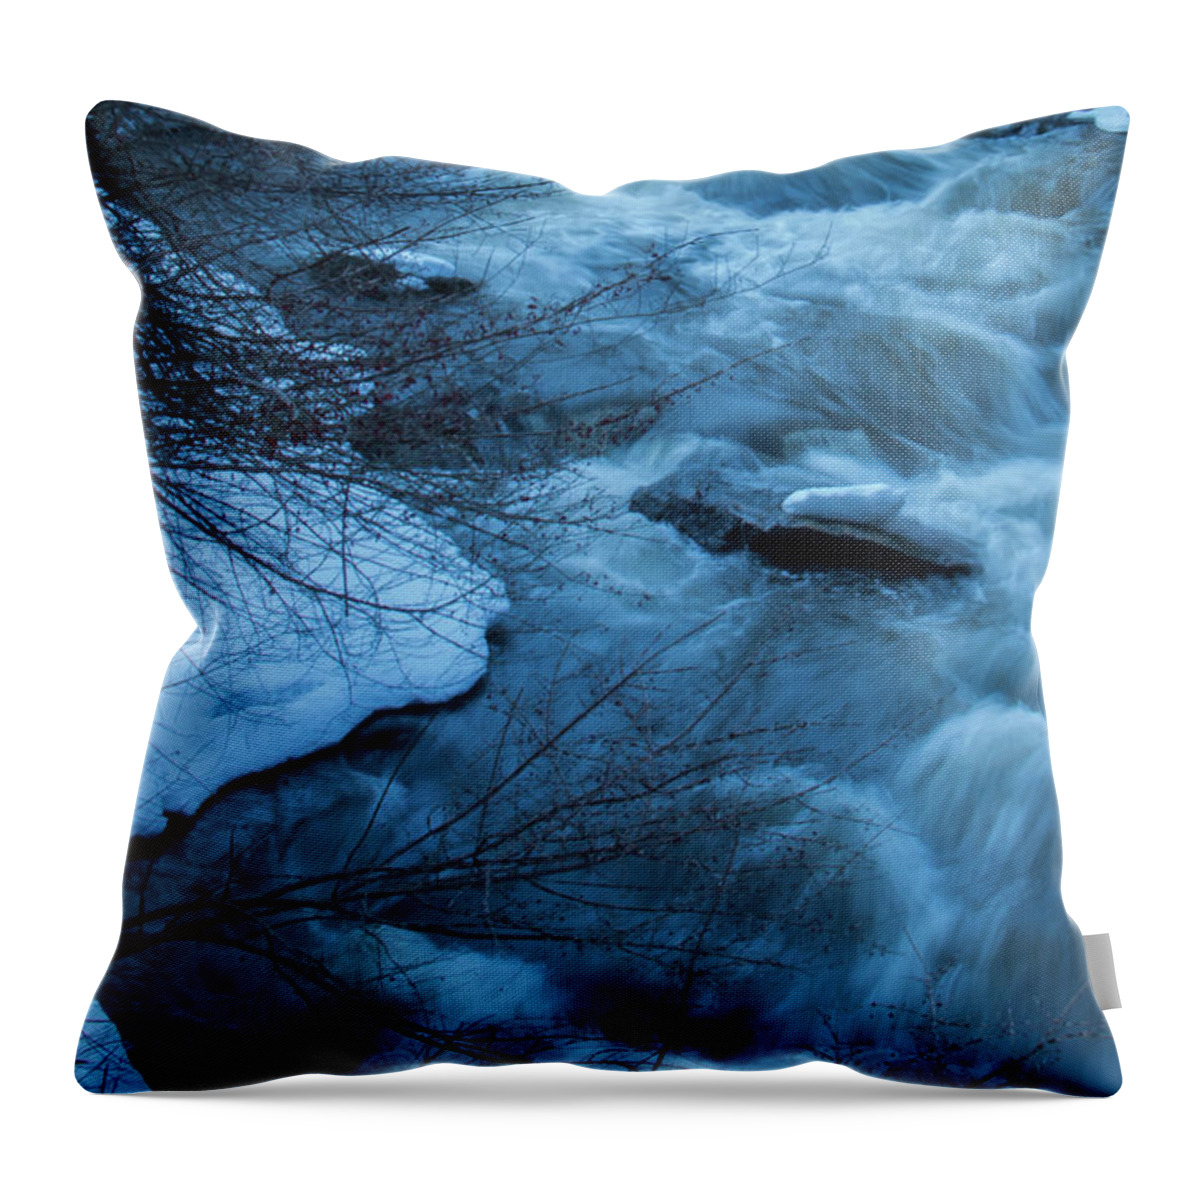 River Throw Pillow featuring the photograph River by Mim White